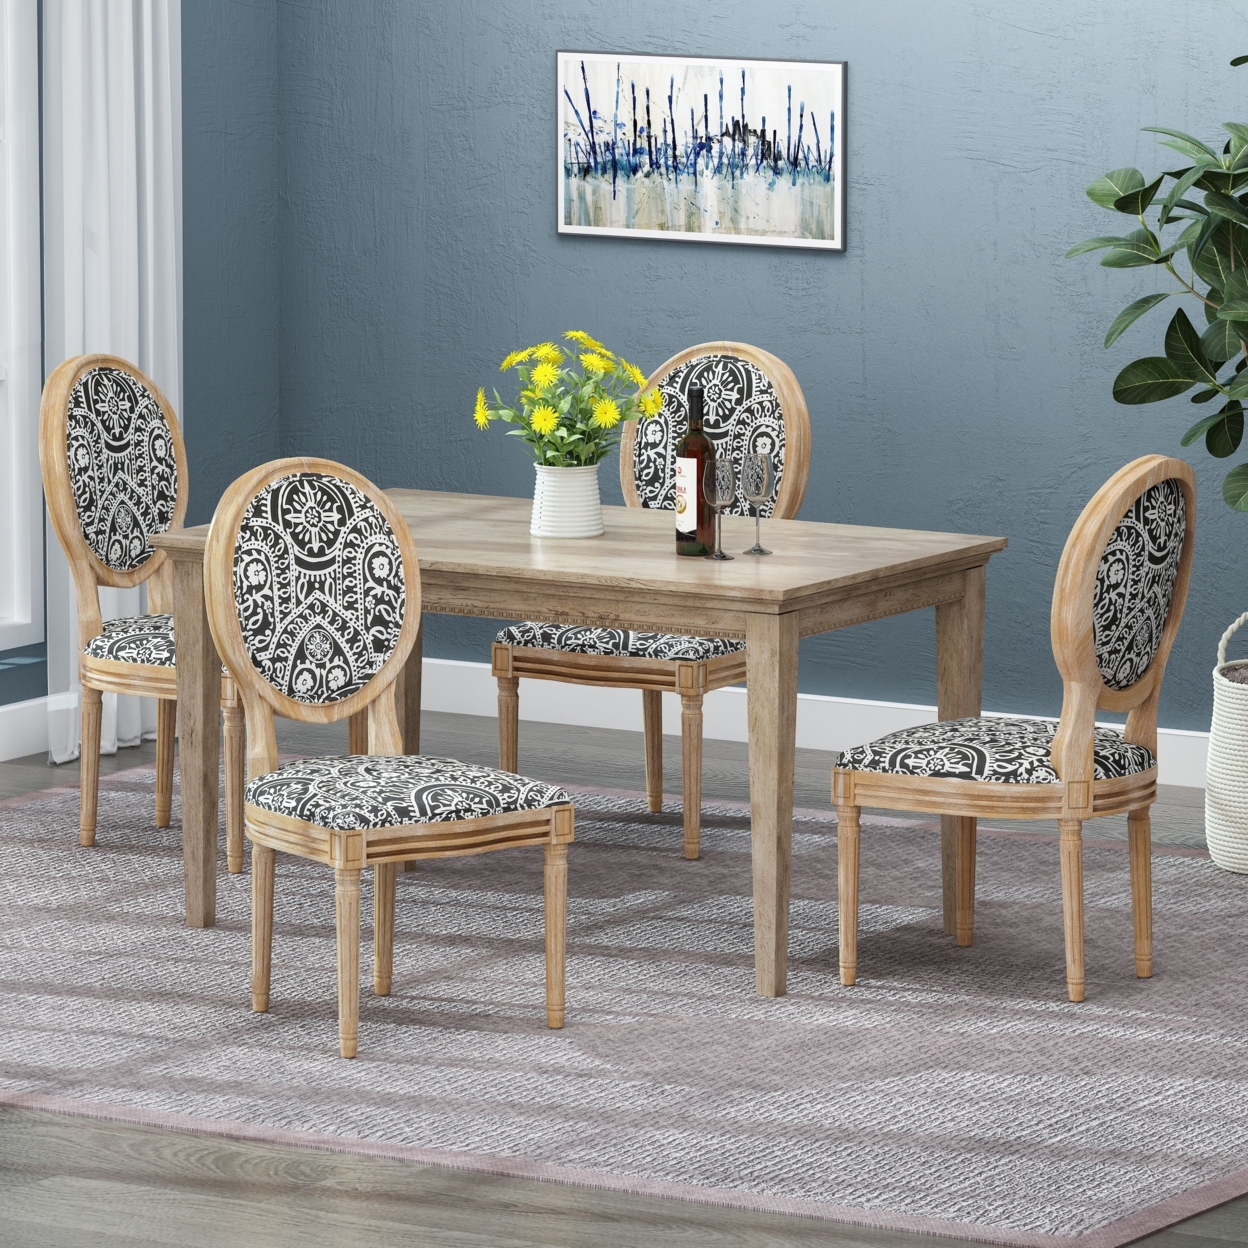 Lariya French Country Dining Chairs (Set Of 4) - Black And White Pattern/natural